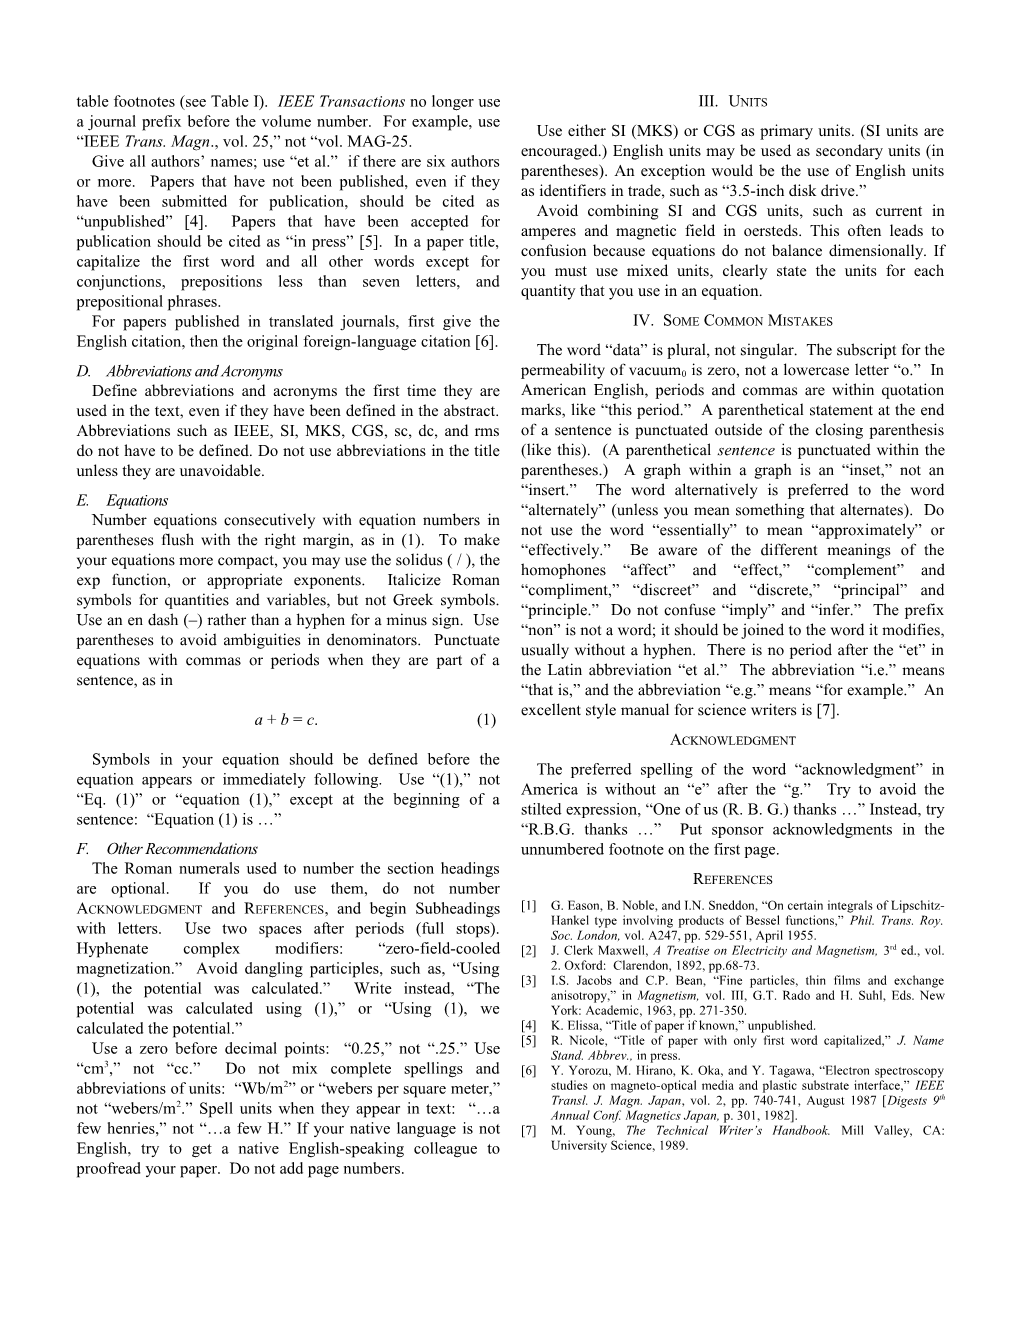 Preparation of Papers in Two-Column Format for the Proceedings of the 2004 Sarnoff Symposium s1